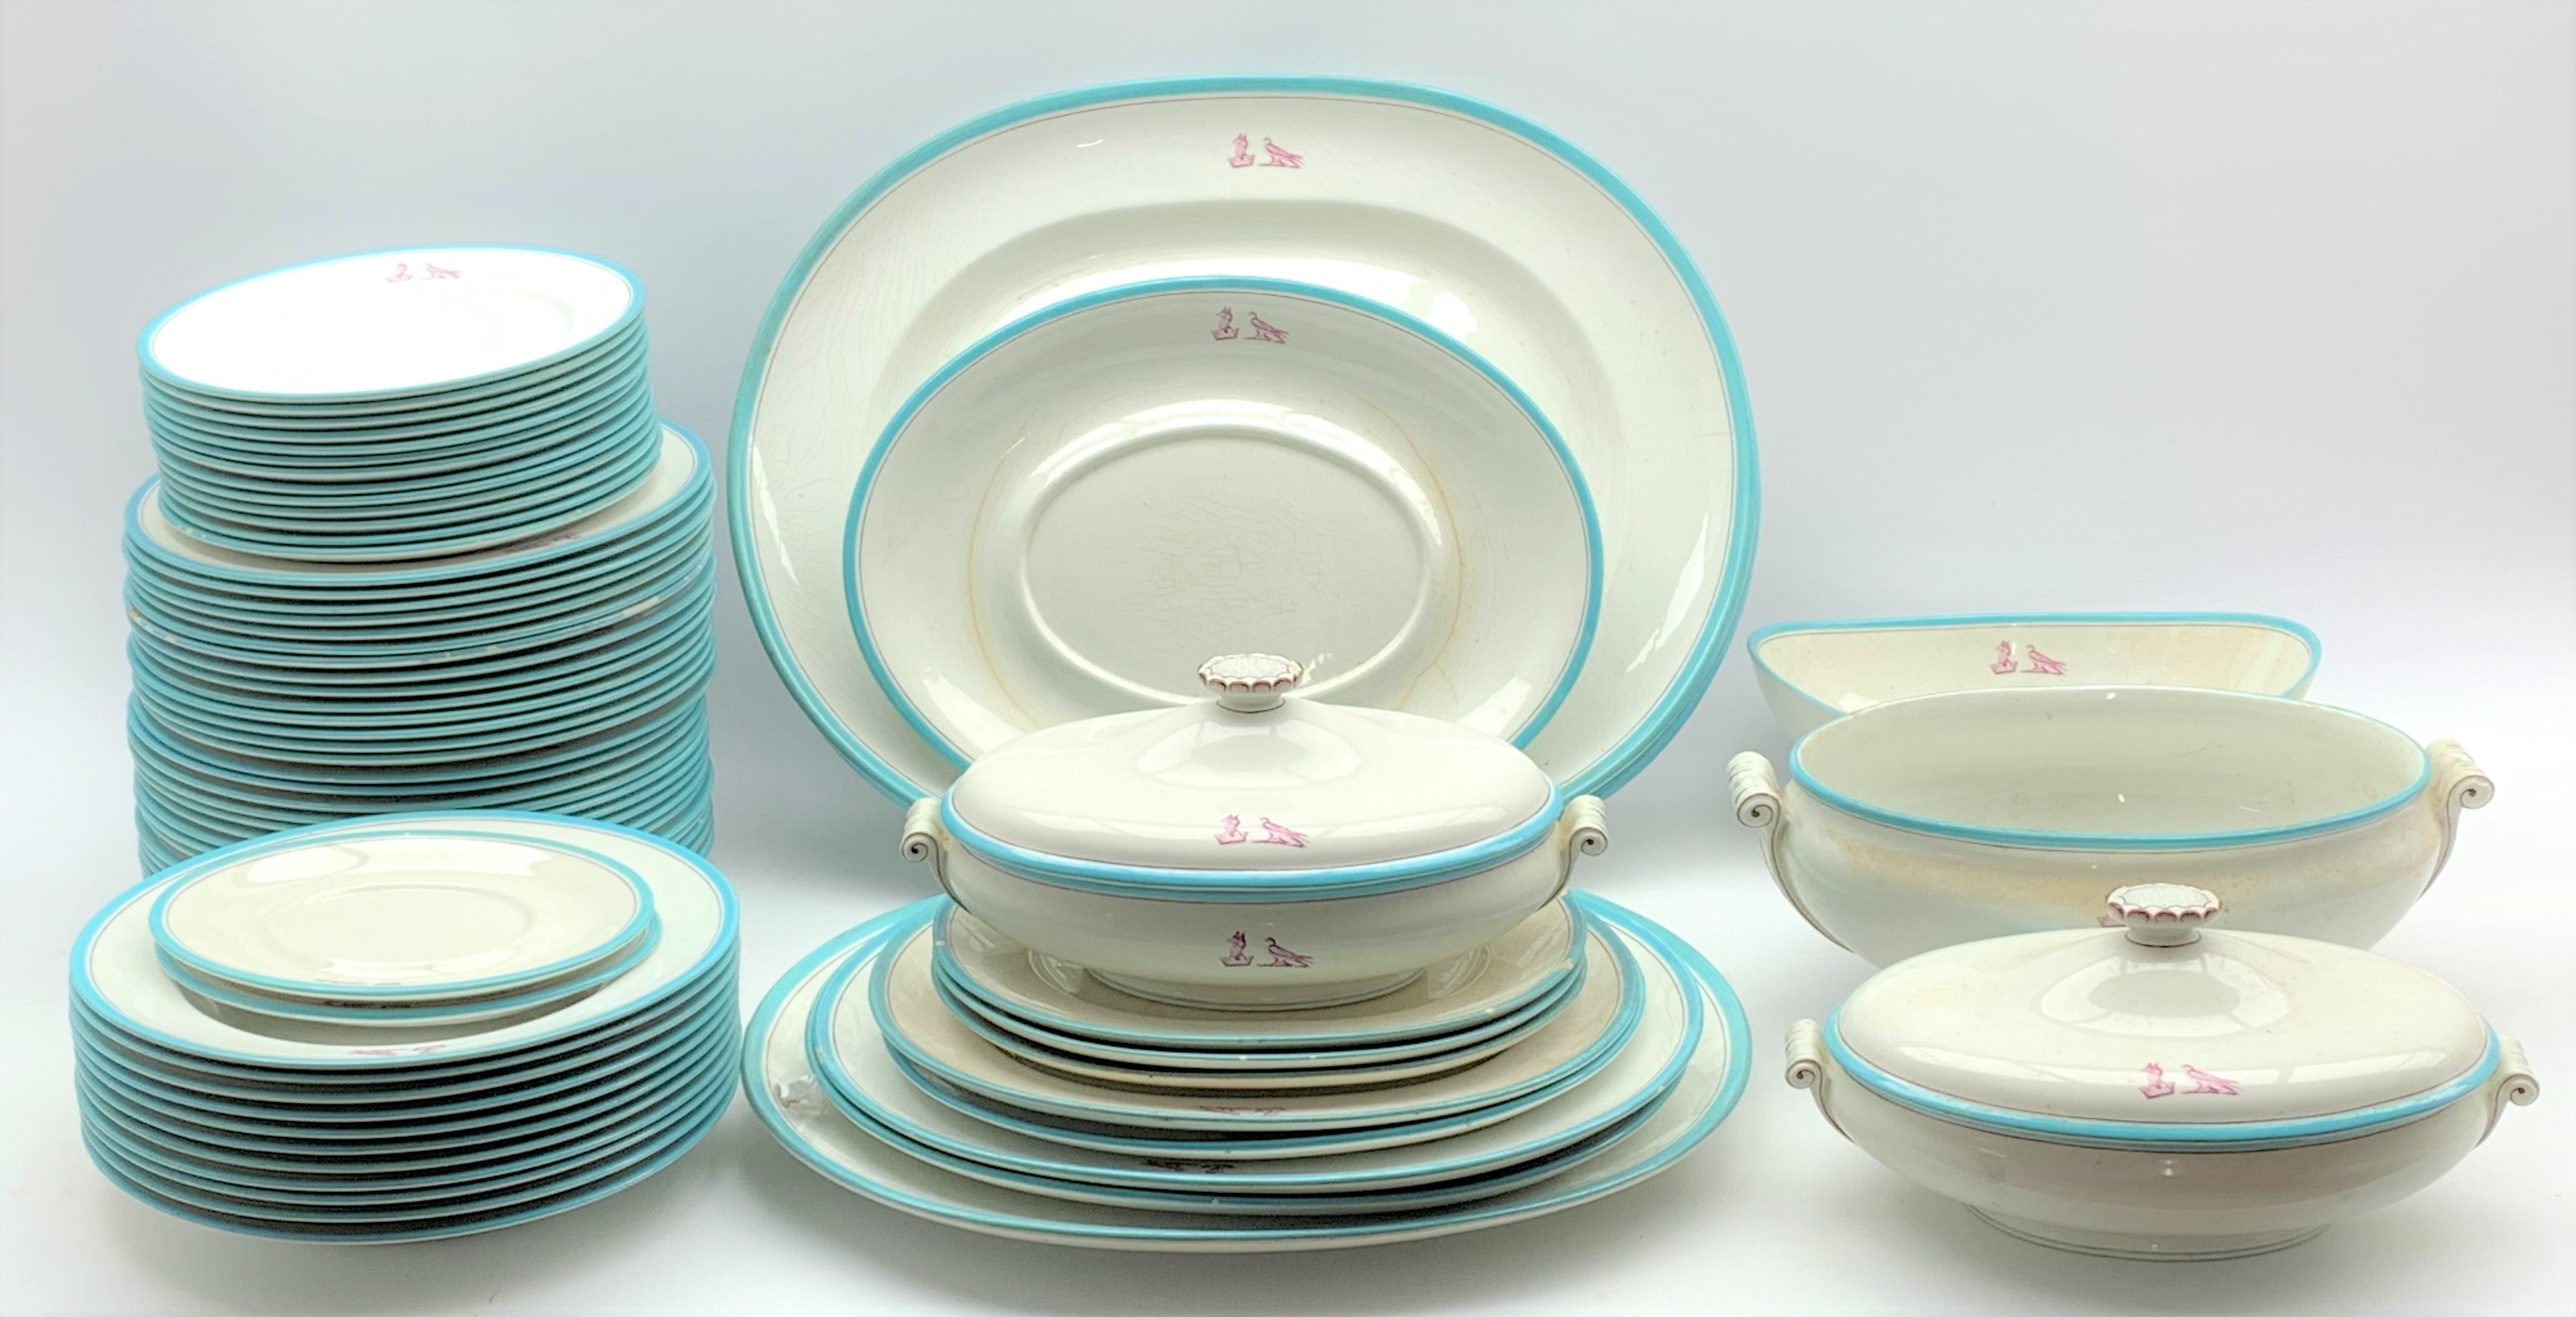 Victorian Wedgwood dinner service with the retailers mark of Thomas Goode decorated with a crest to